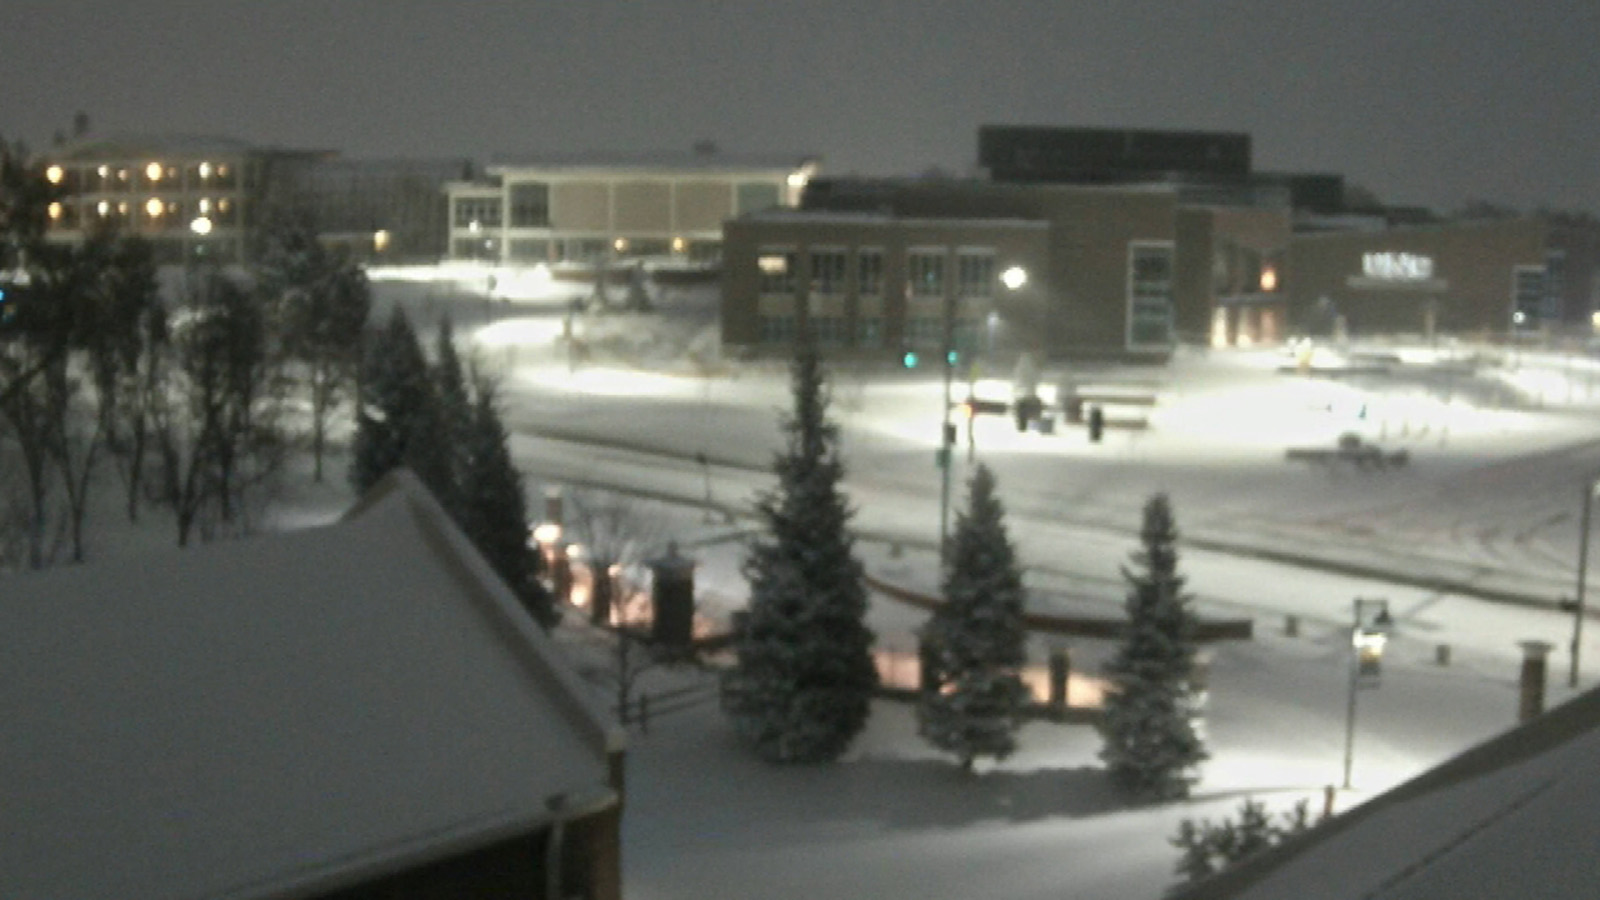 The scene at the University of Northern Colorado campus in Greeley on Tuesday before daybreak.